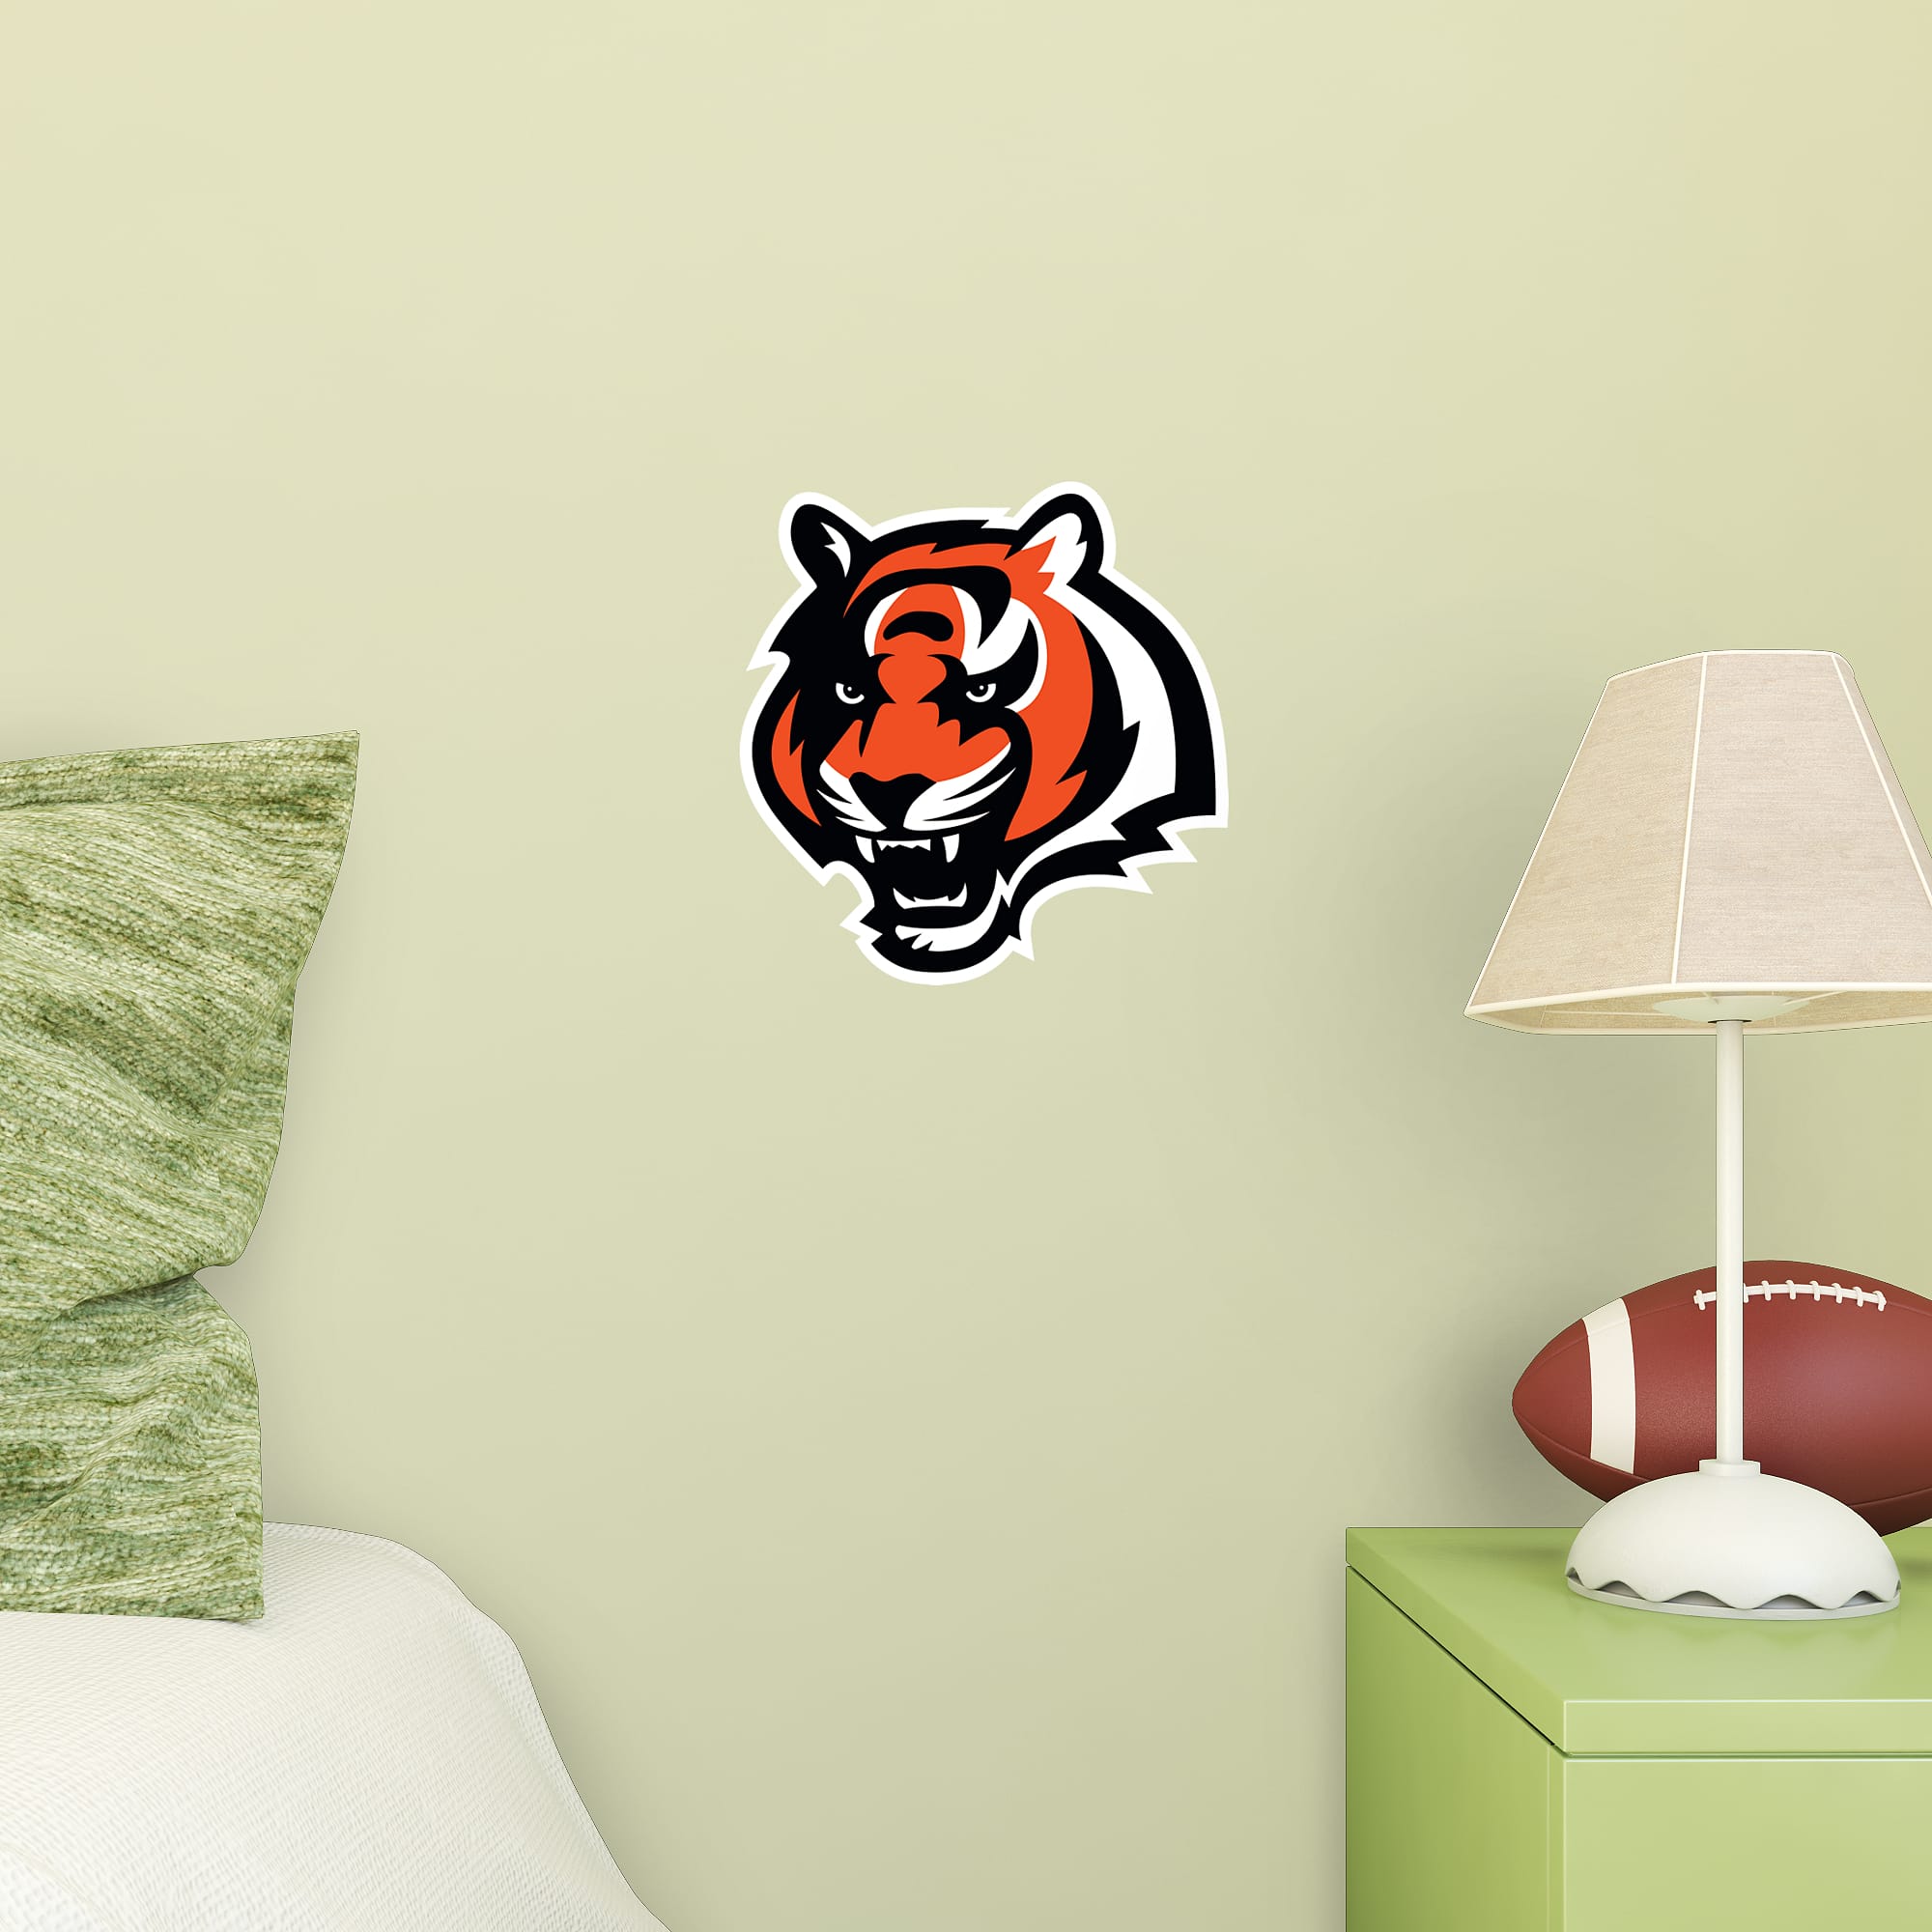 Cincinnati Bengals: Tiger Head Logo - Officially Licensed NFL Removable Wall Decal Large by Fathead | Vinyl